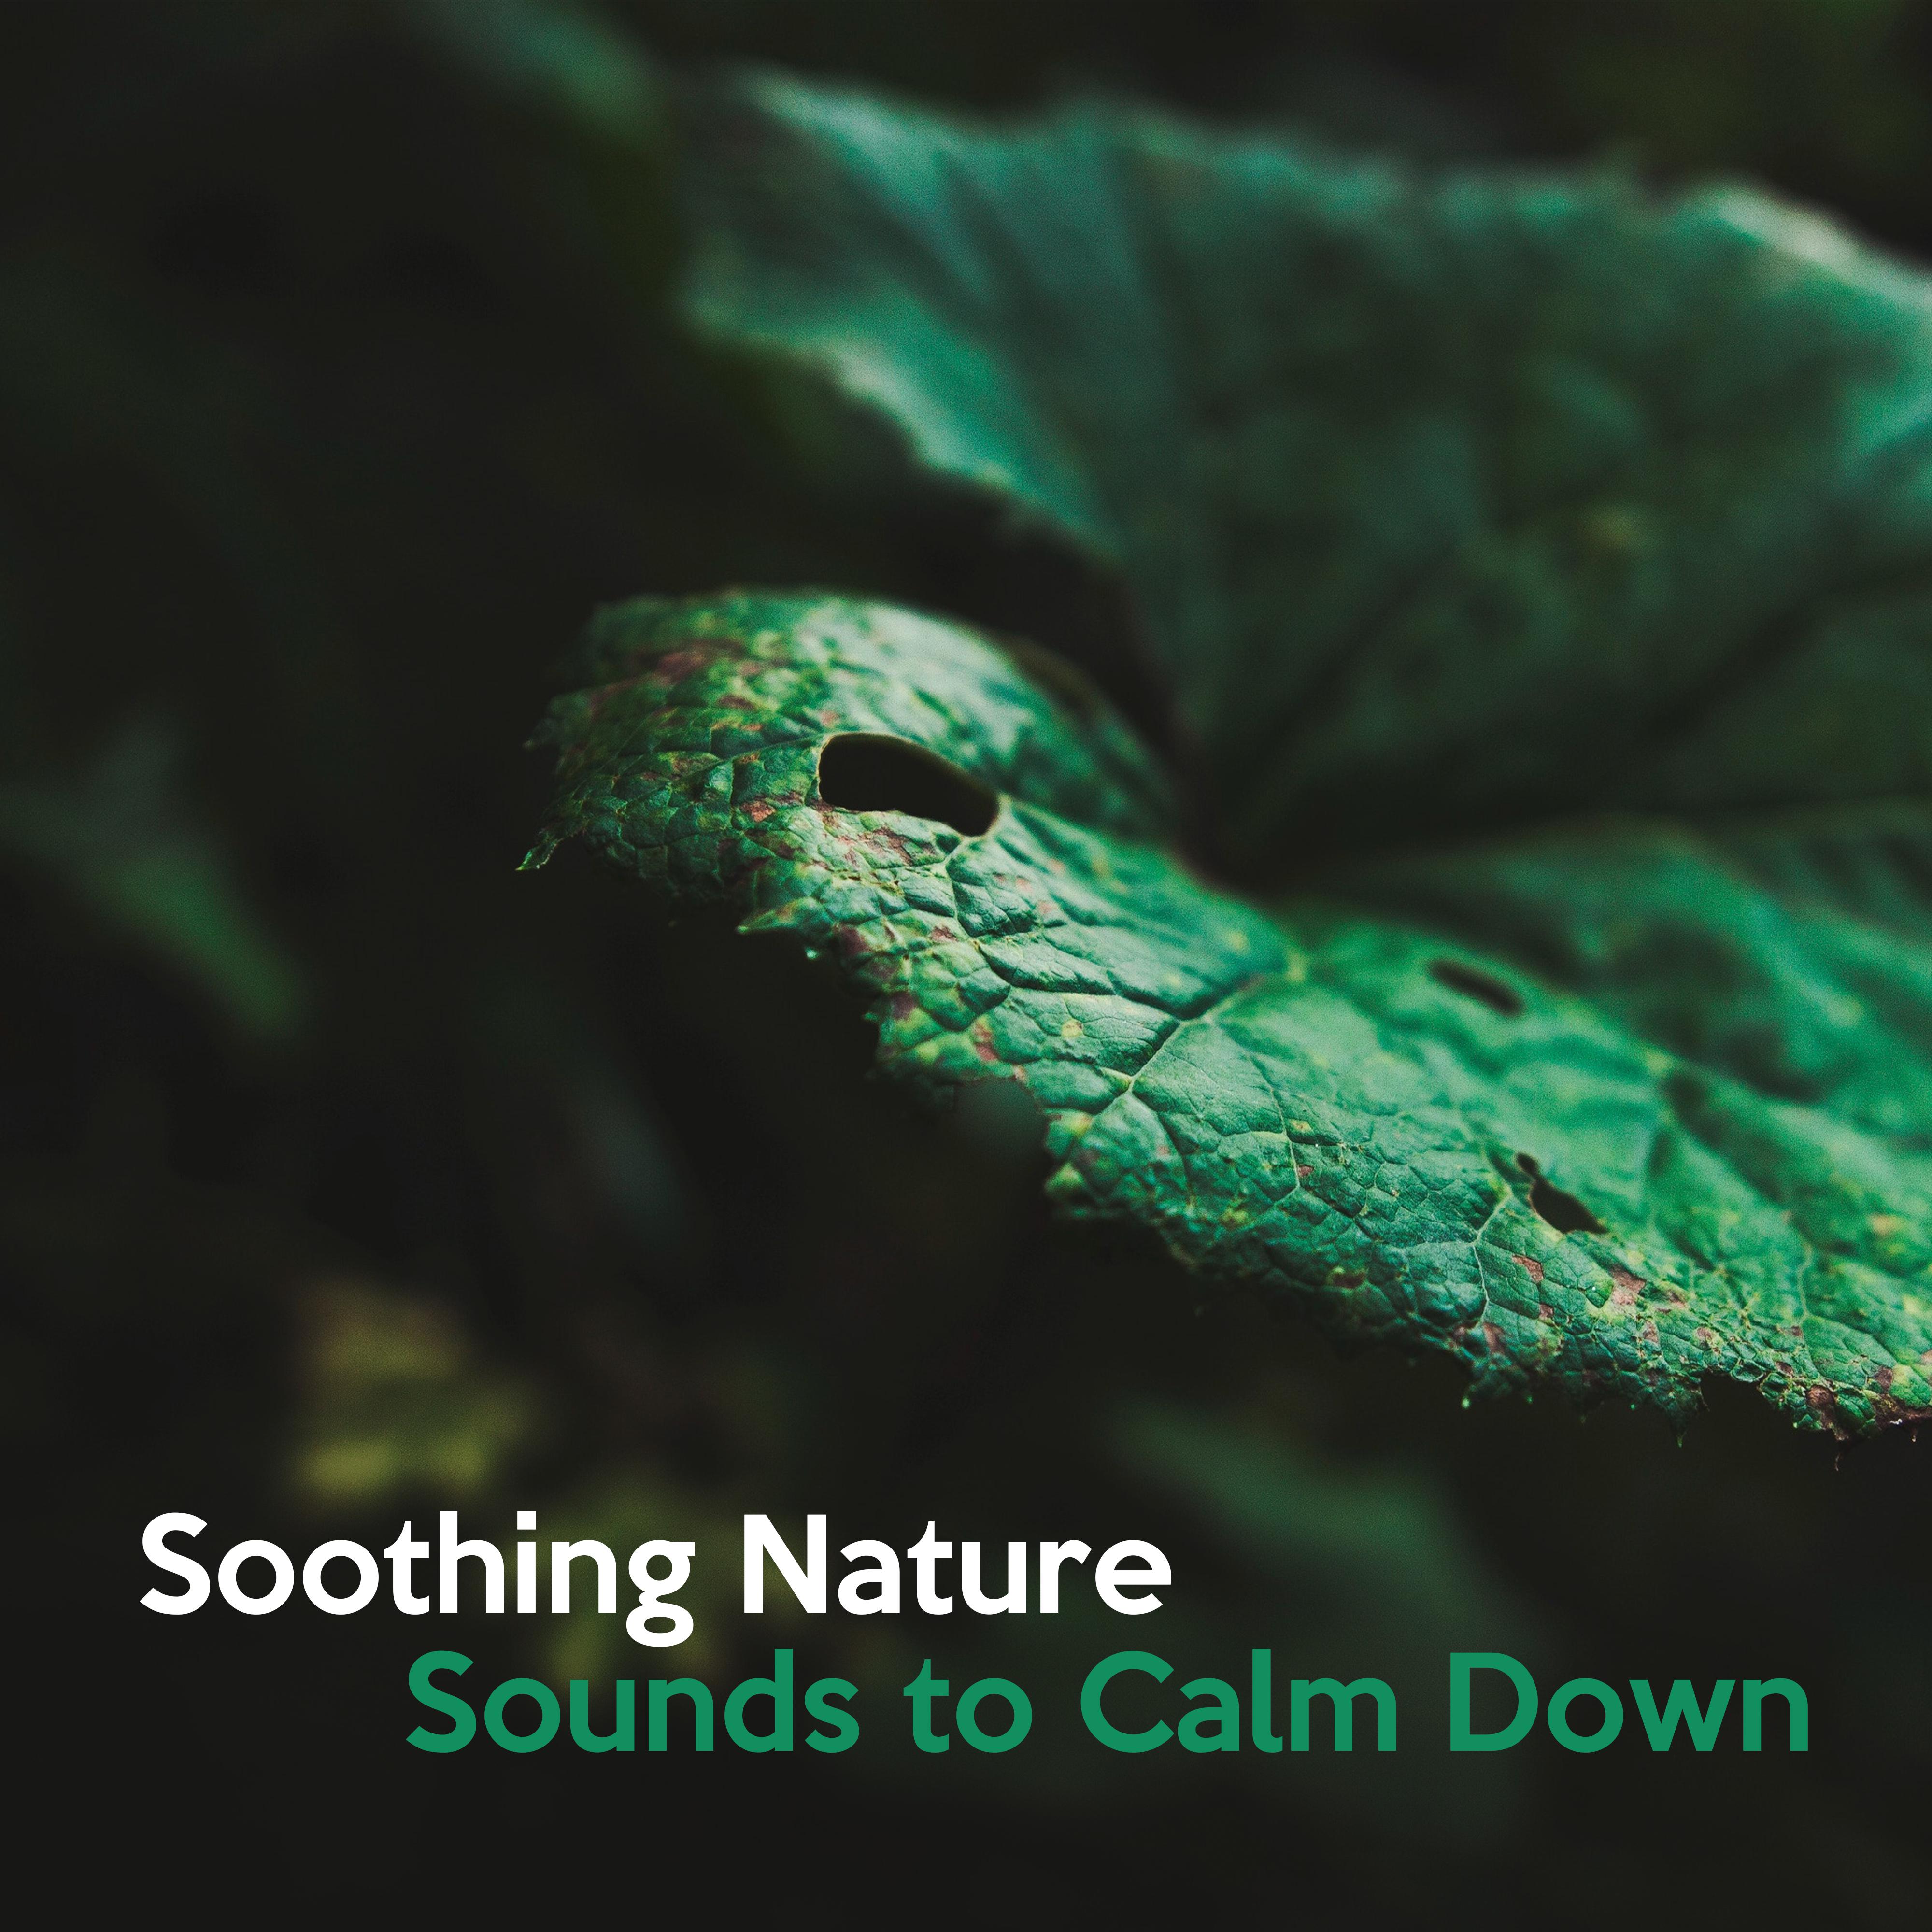 Soothing Nature Sounds to Calm Down  Peaceful Nature Waves, Spiritual Journey, Inner Calmness, Stress Free, New Age Music